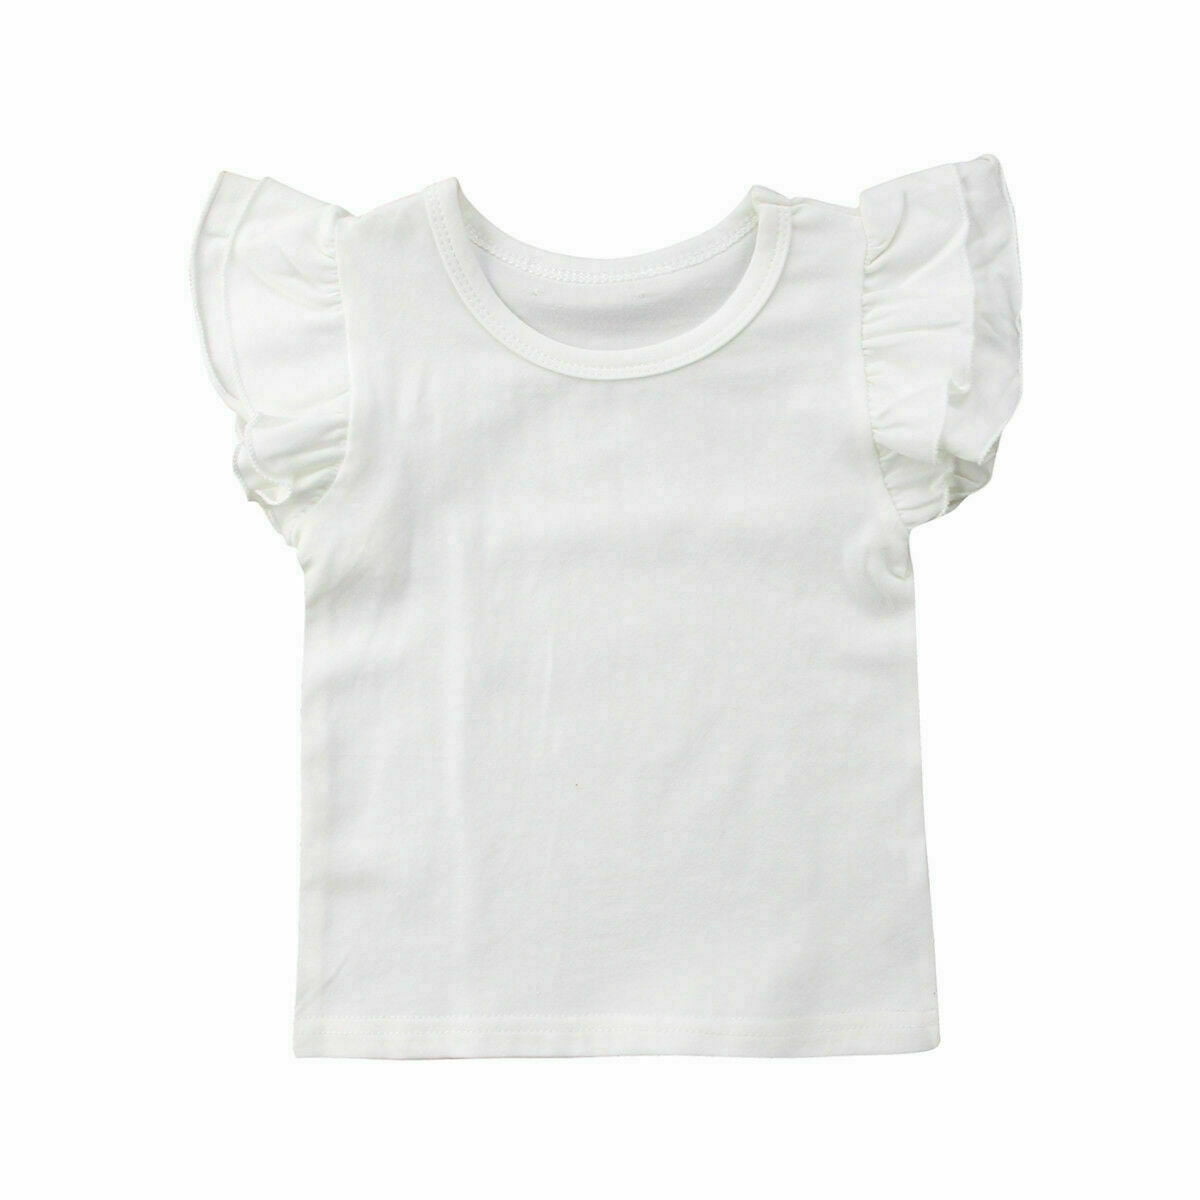 Laerion Toddler Baby Girls Ruffle T-Shirt Top Blouse Solid Color Basic Tees Plain Shirt 